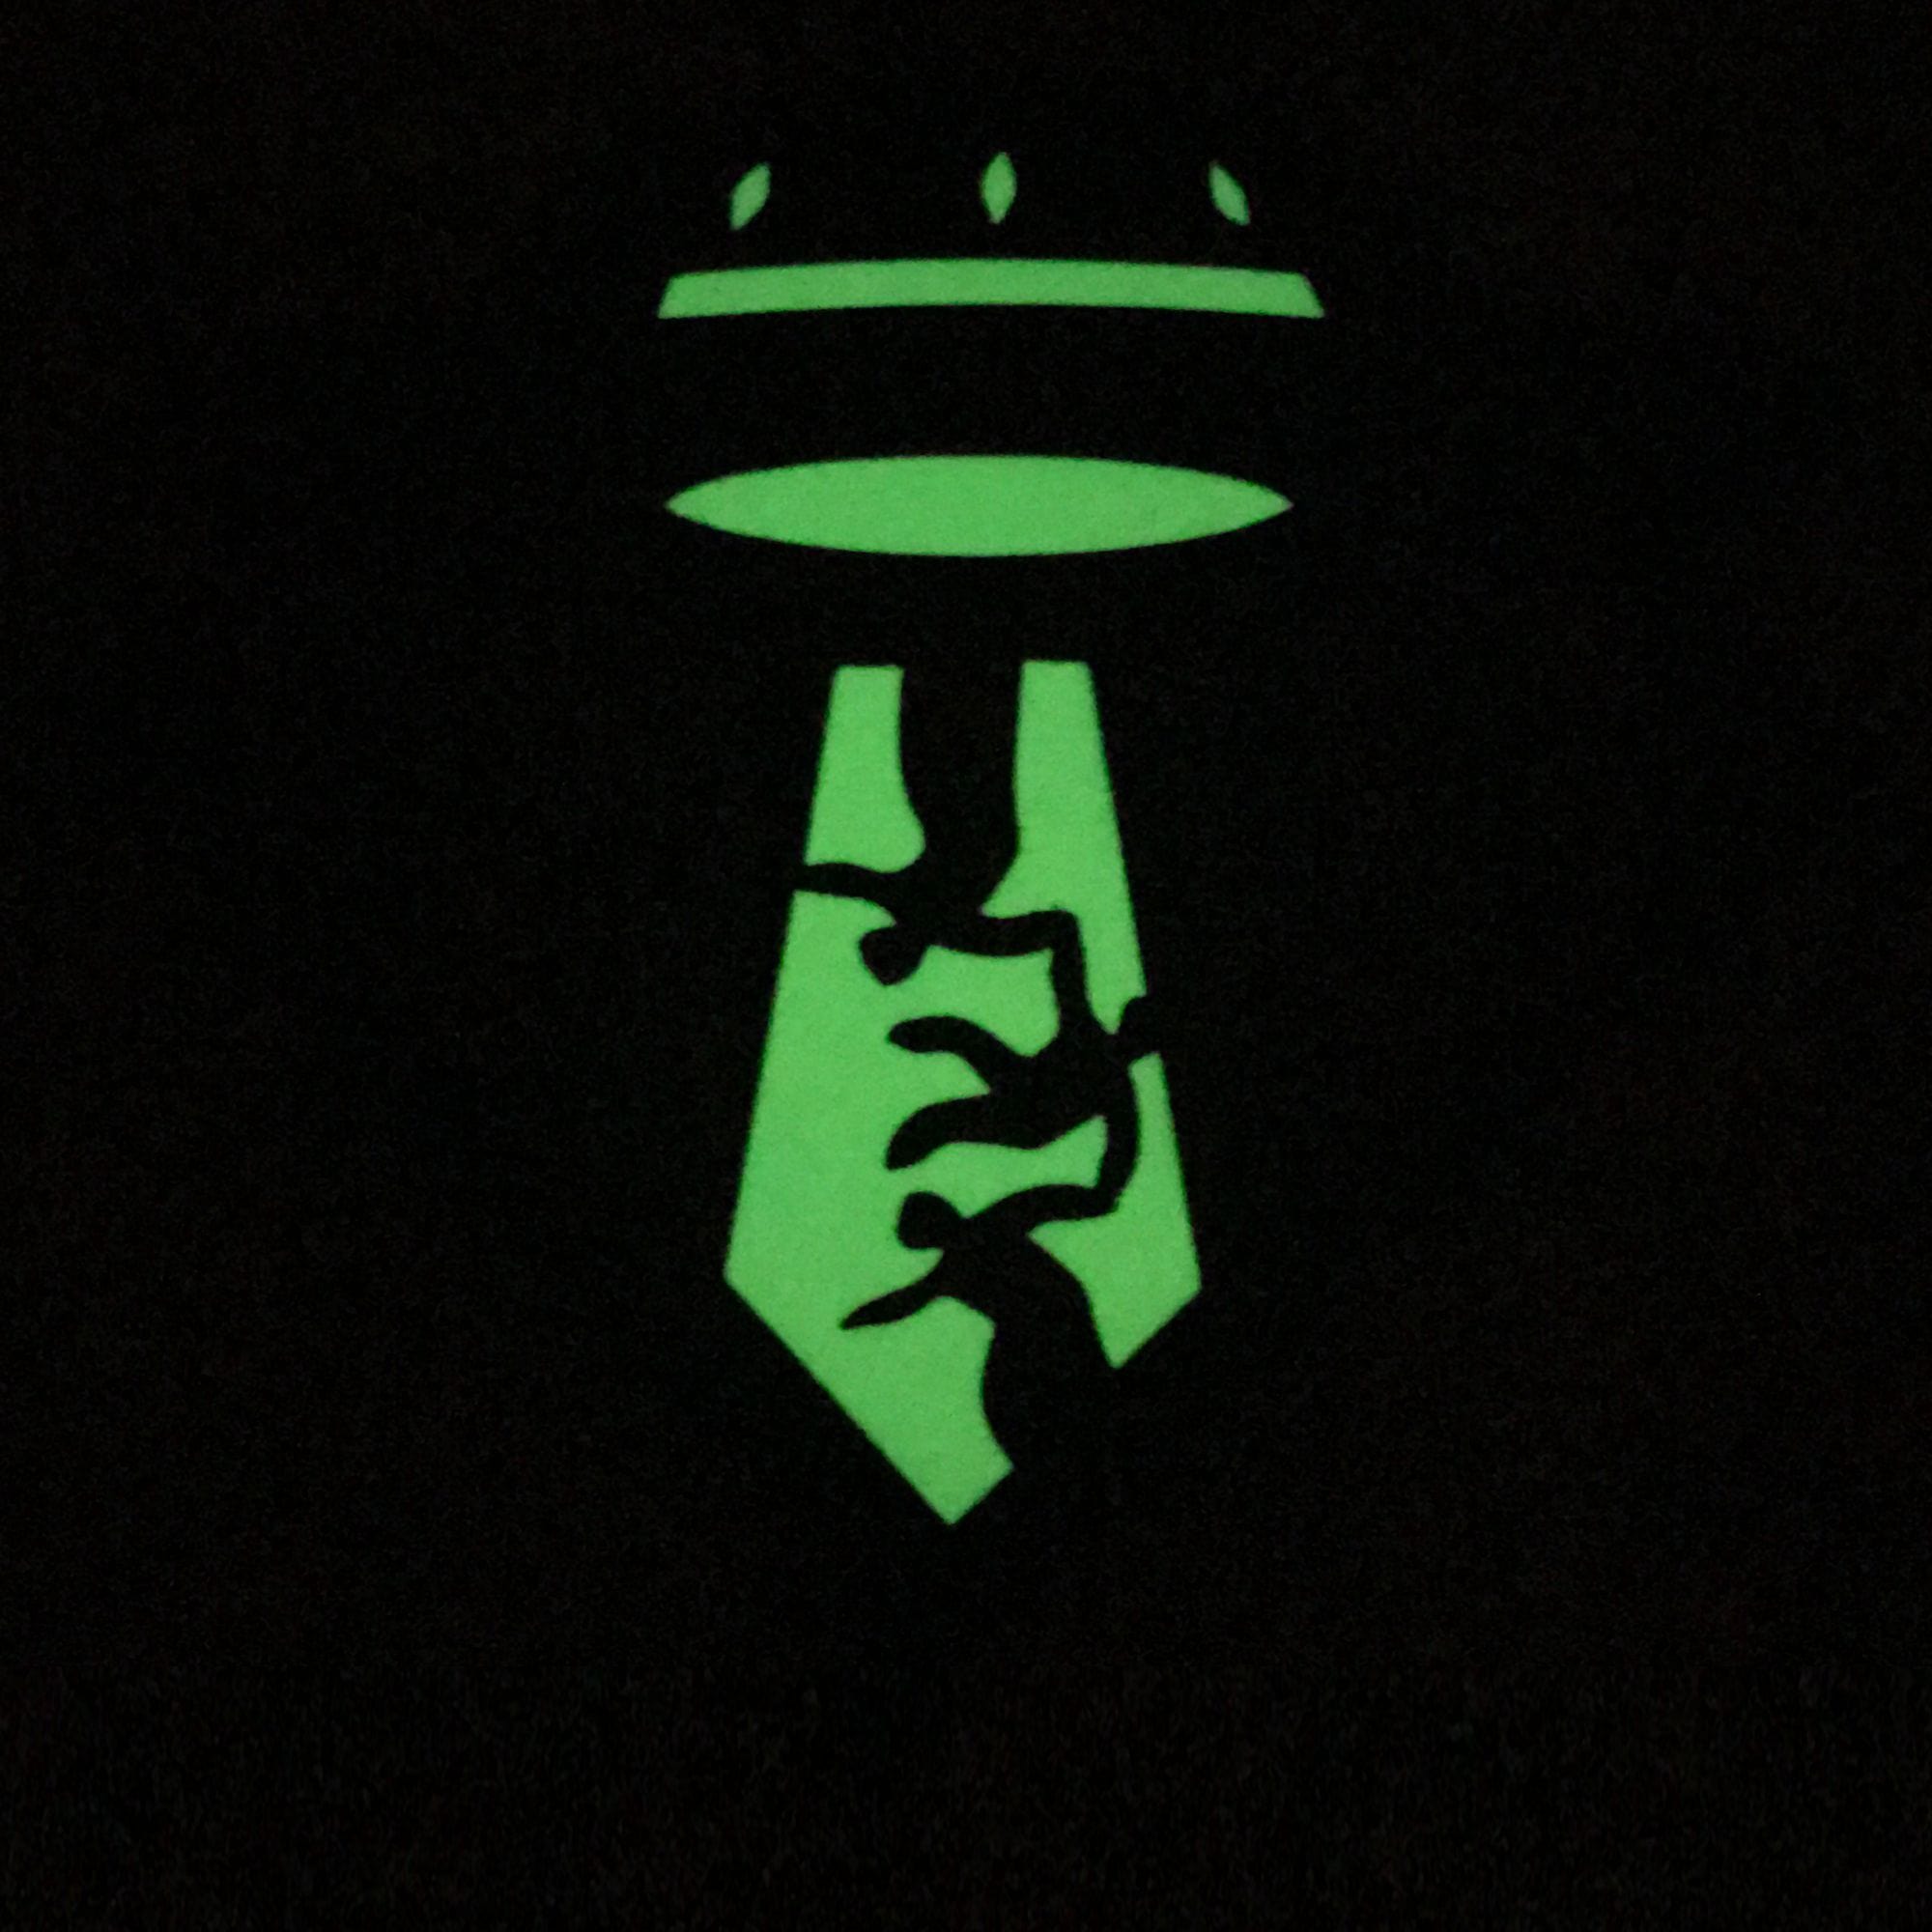 Tactical Gear Junkie Patches June 2021 Patch of the Month - UAP - Glow in the Dark